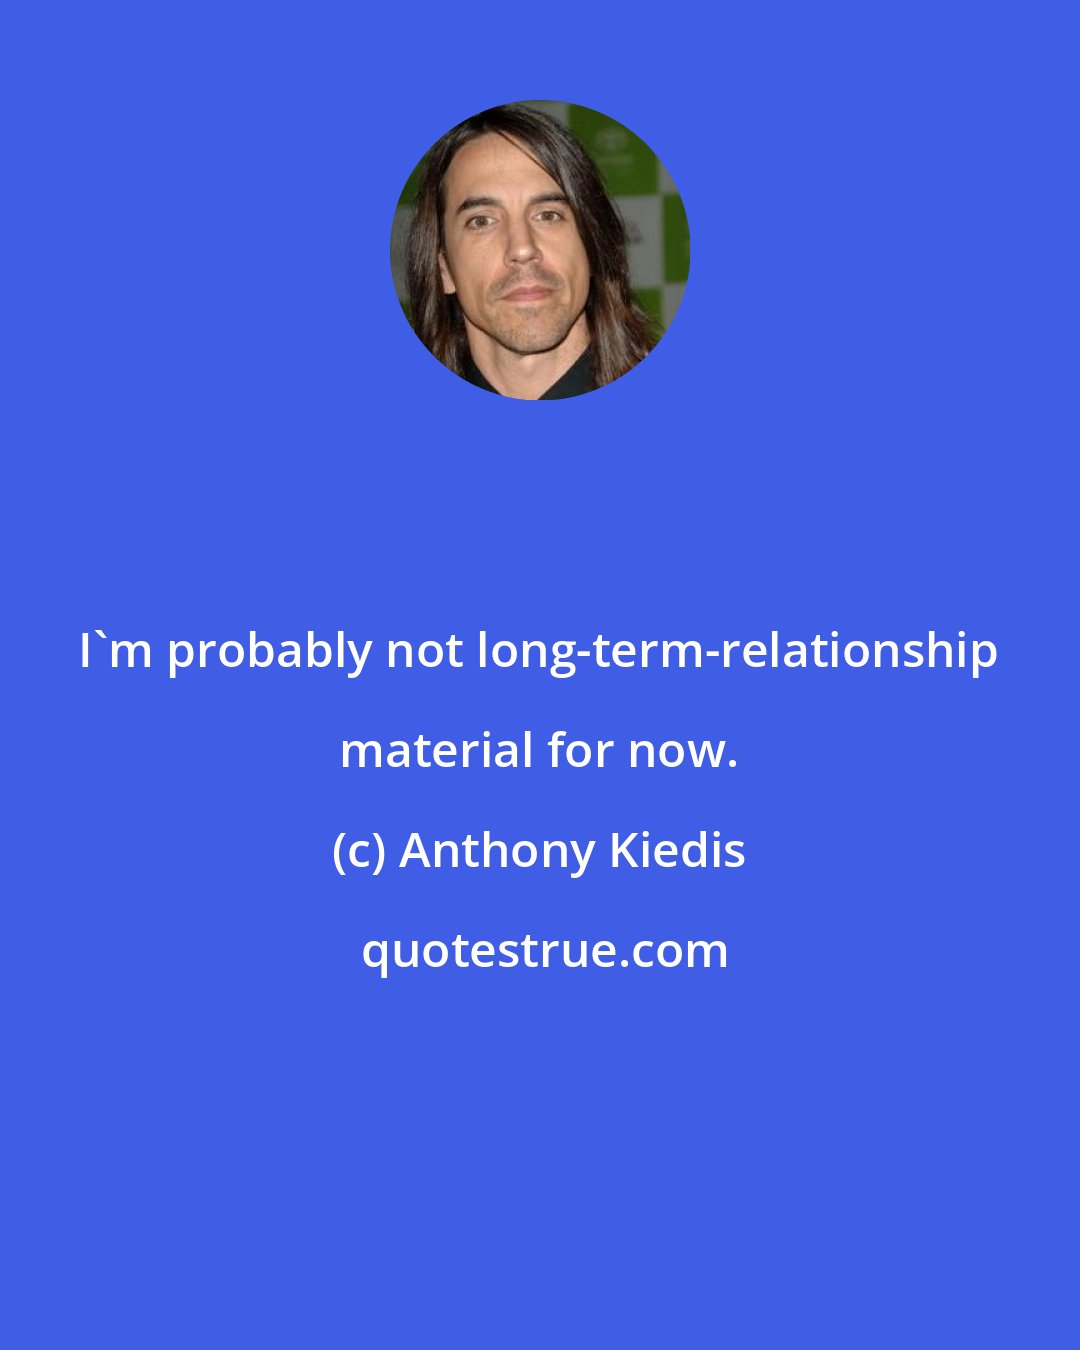 Anthony Kiedis: I'm probably not long-term-relationship material for now.